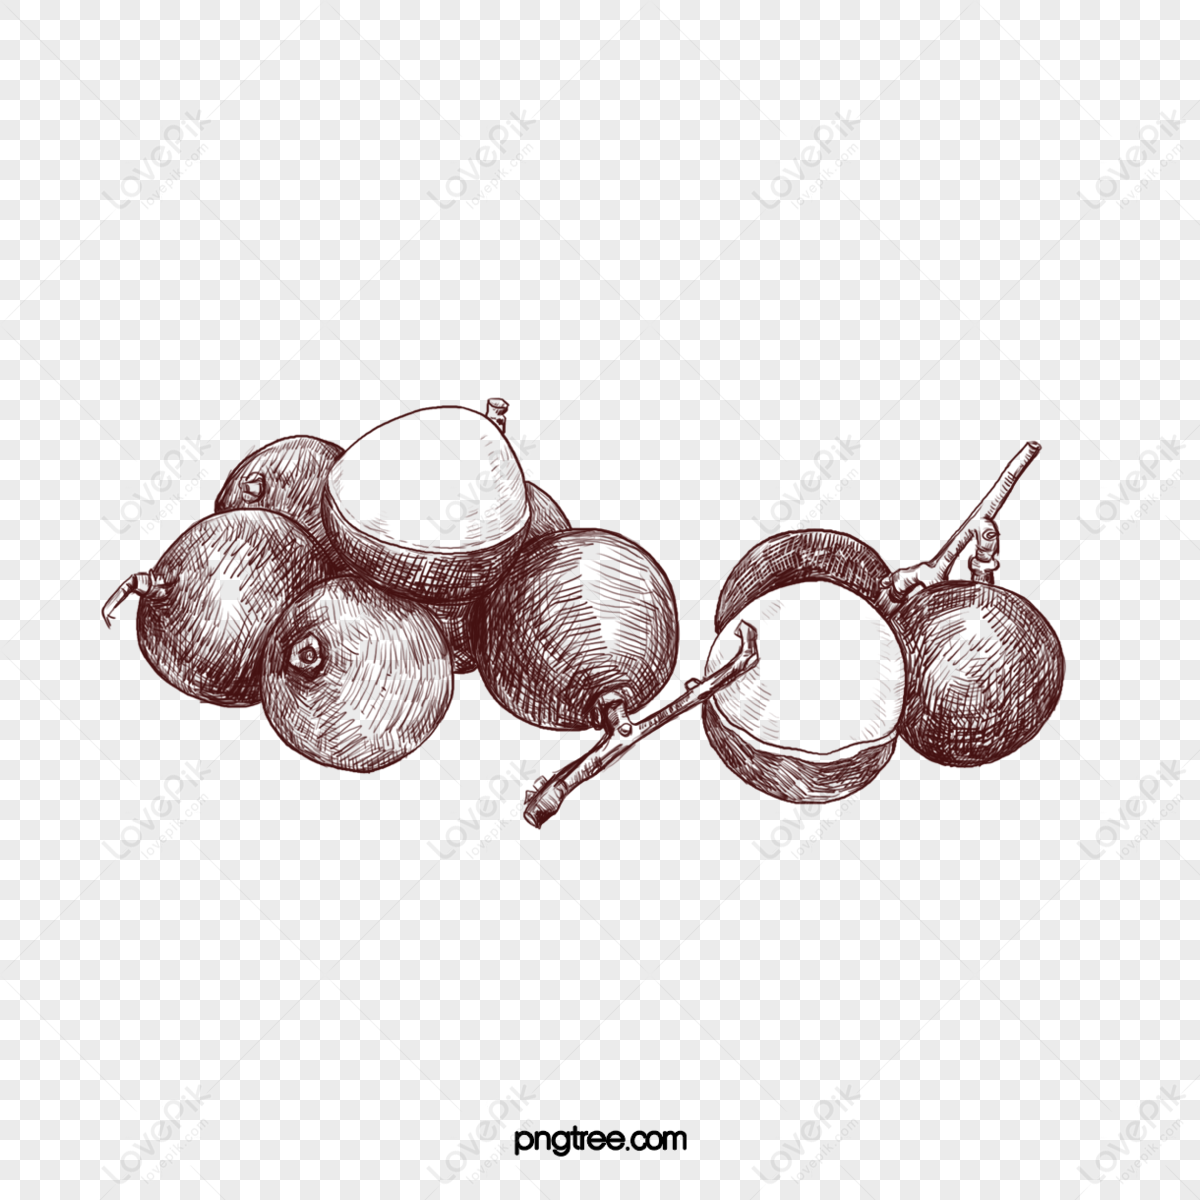 Creative Line Drawing Coconut PNG Images With Transparent Background ...